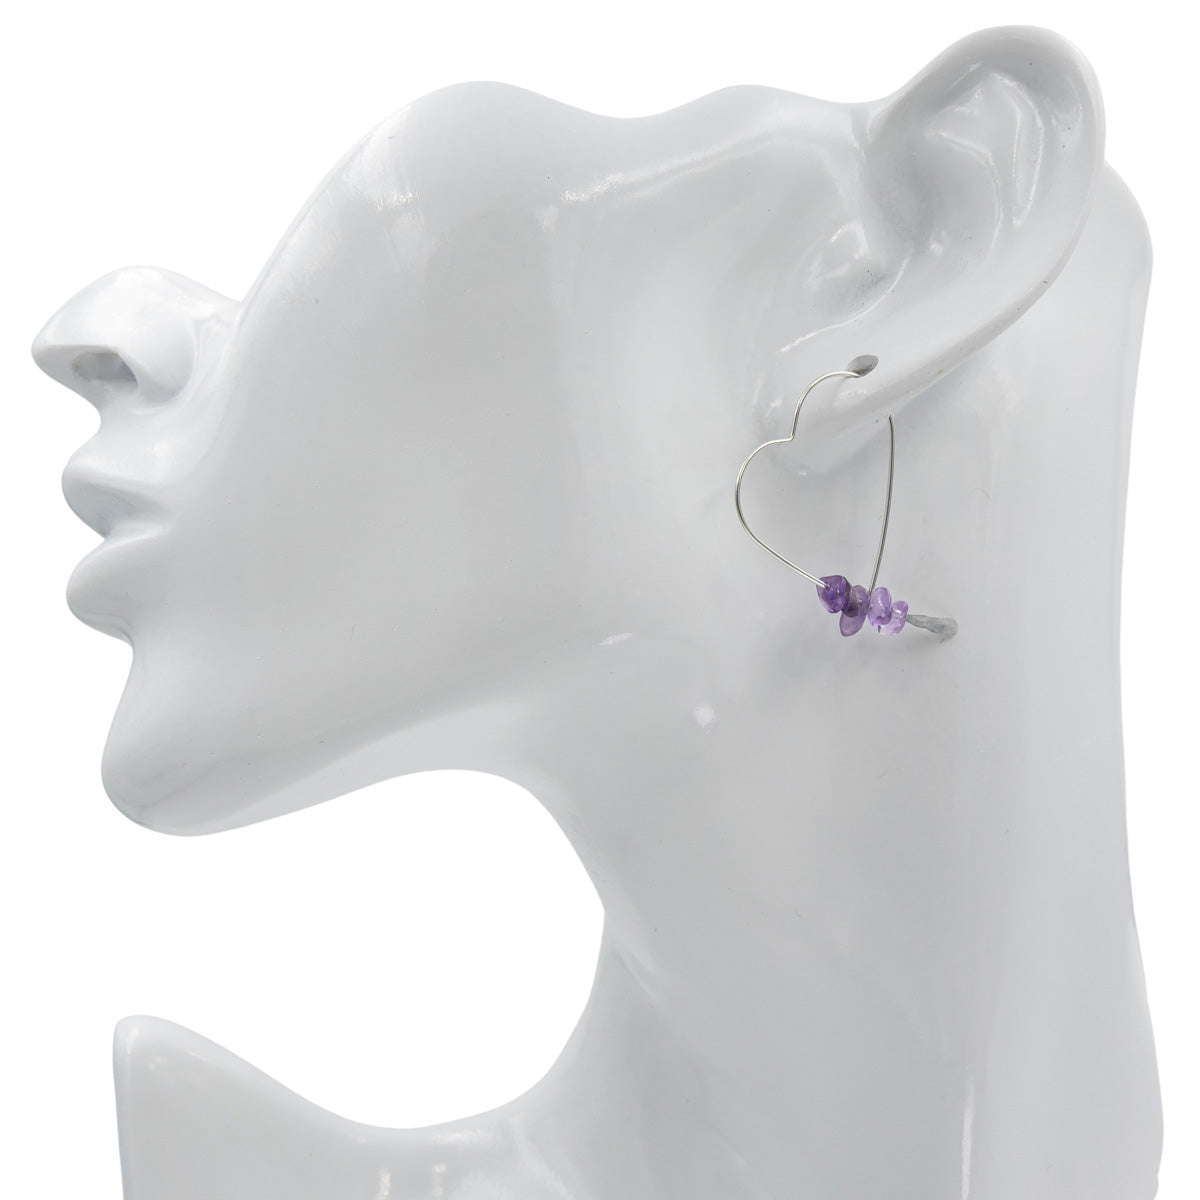 Earth Song Jewelry Handmade Sterling Silver Heart Earrings with Amethyst stones on mannequin head